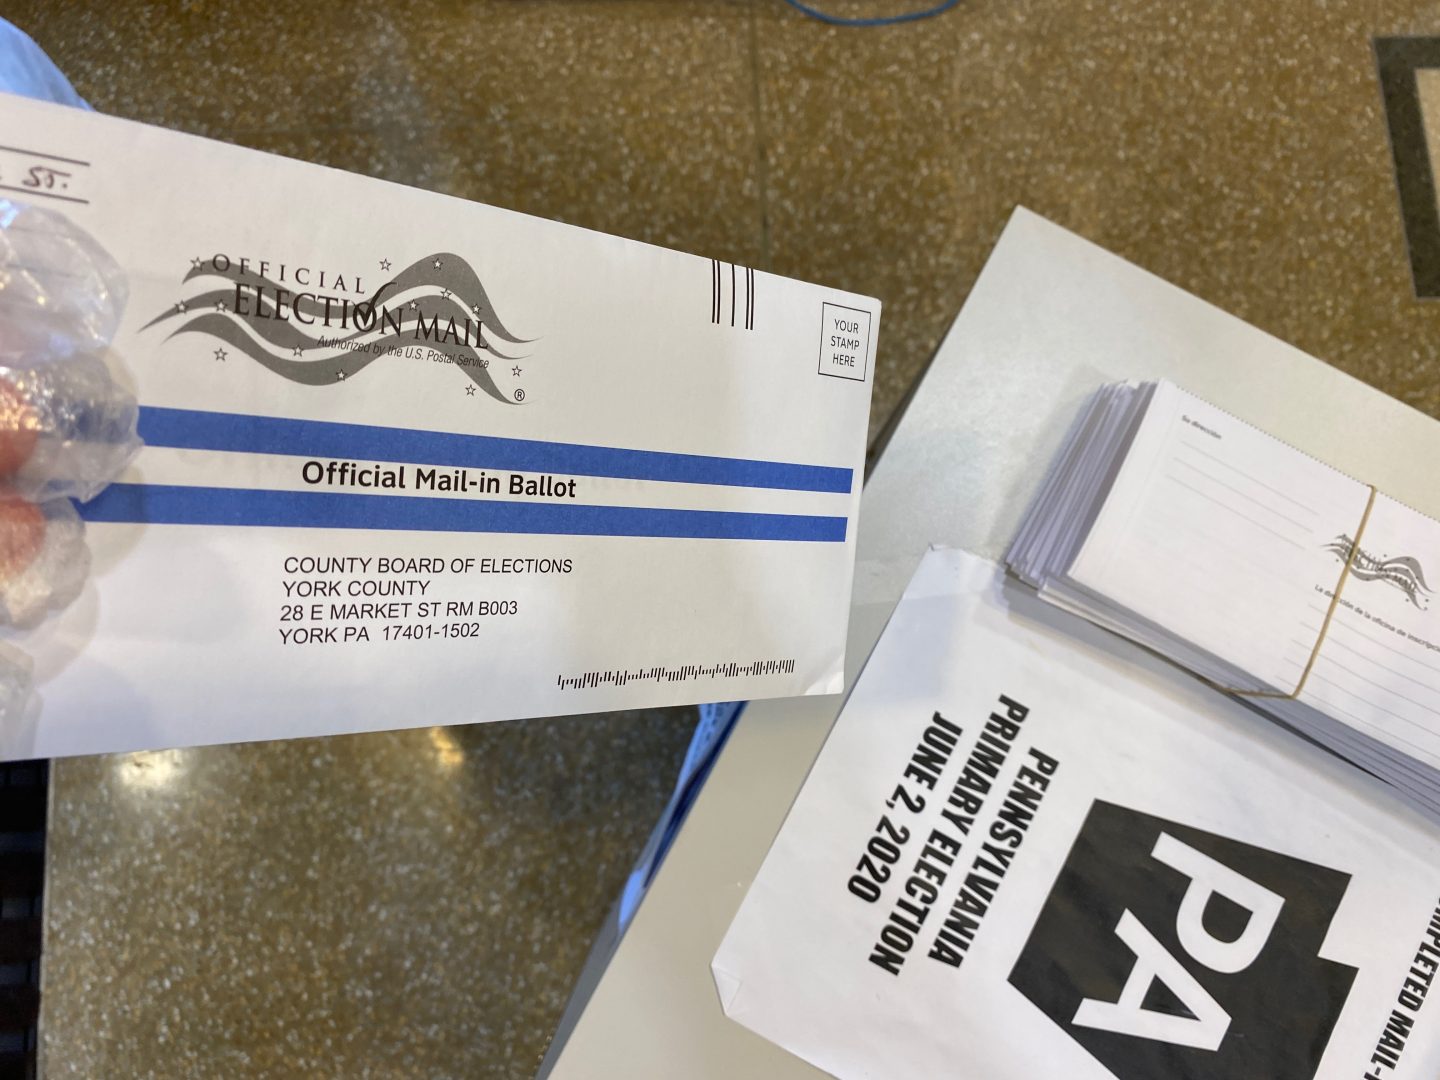 York County offered voters a dropbox for mailed ballots at its government center ahead of the primary June 2. Since then, Pennsylvania Department of State has offered to cover postage costs for the general election. But rules for hand delivering ballots are among issues at the focus of a federal lawsuit over the commonwealth’s election procedures filed by President Donald Trump's re-election campaign. The case is but one source of uncertainty complicating state election code reforms and planning by counties for November.